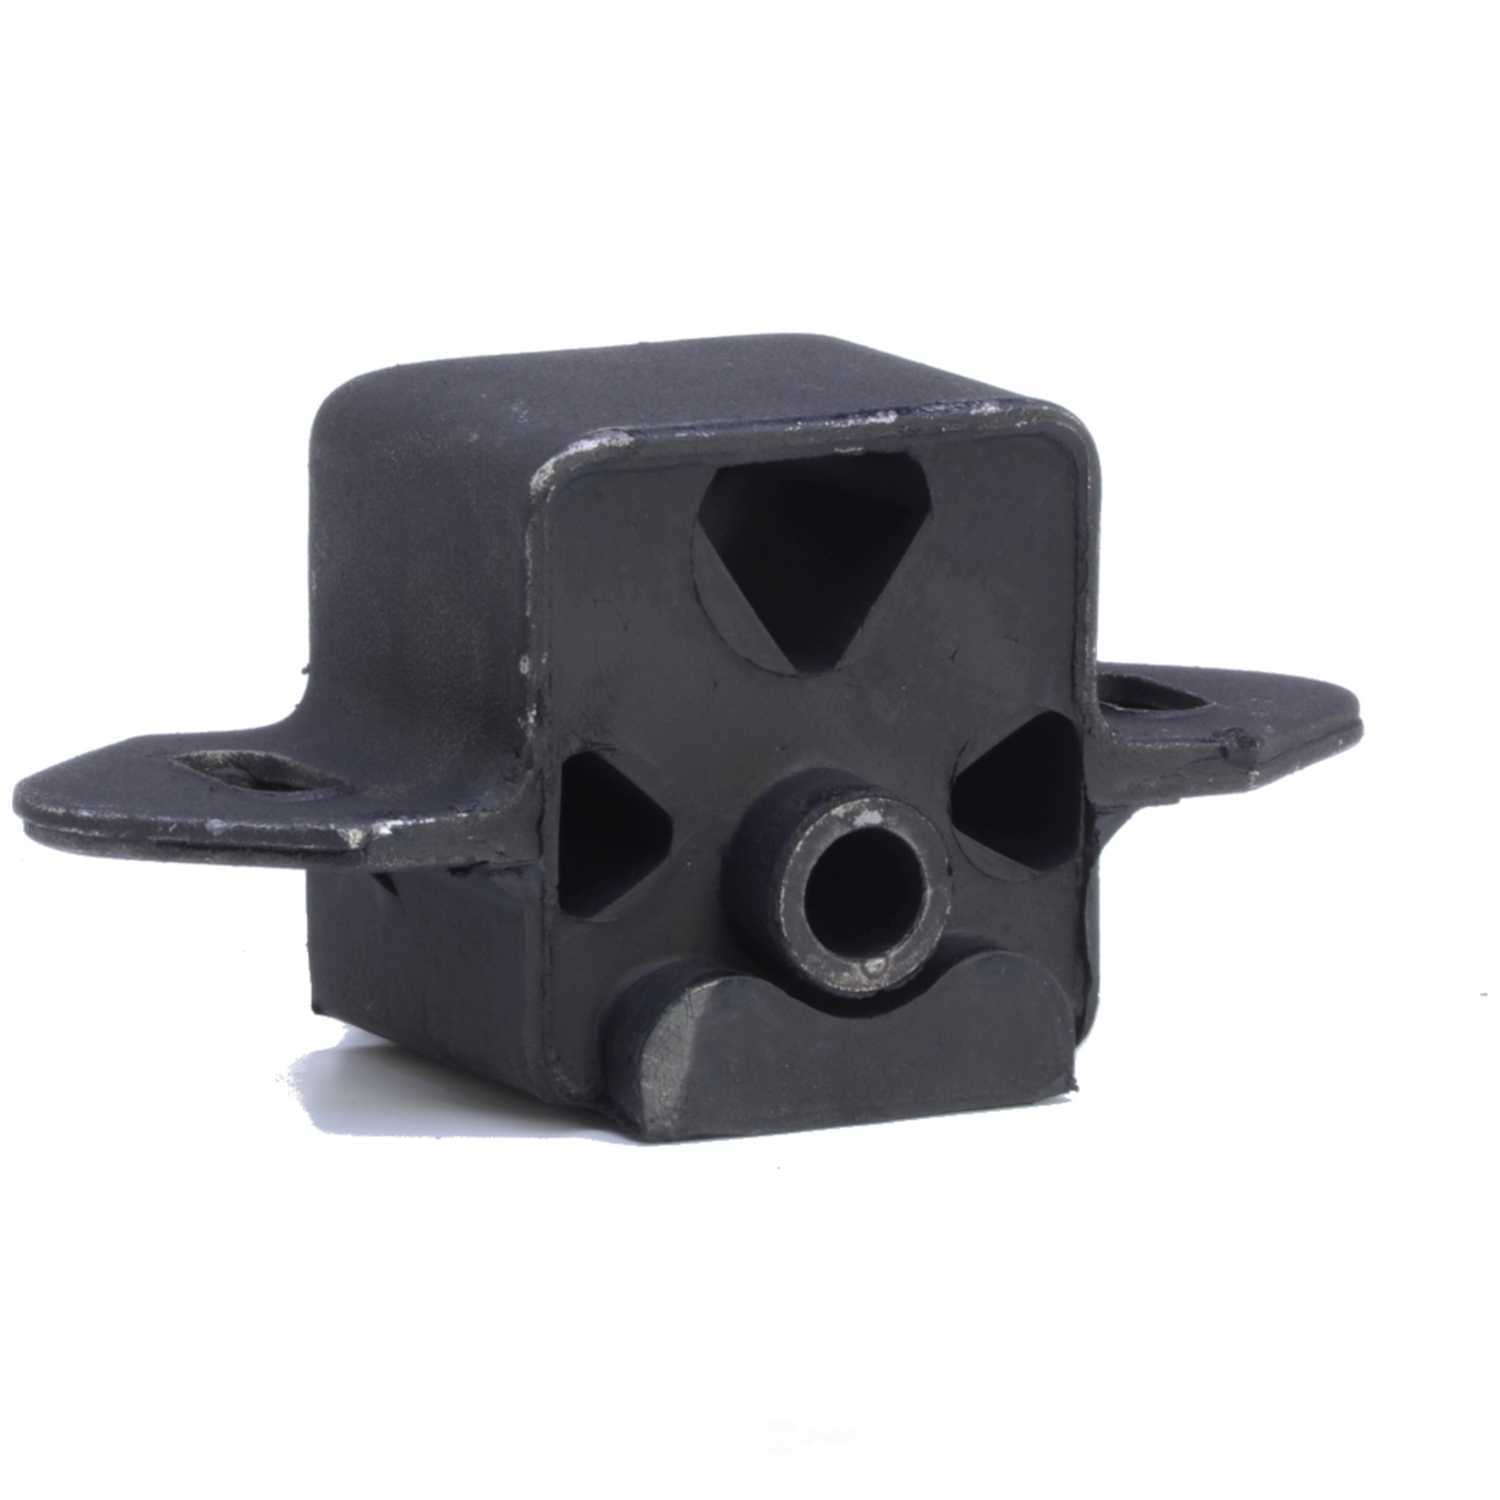 ANCHOR - Engine Mount - ANH 2600